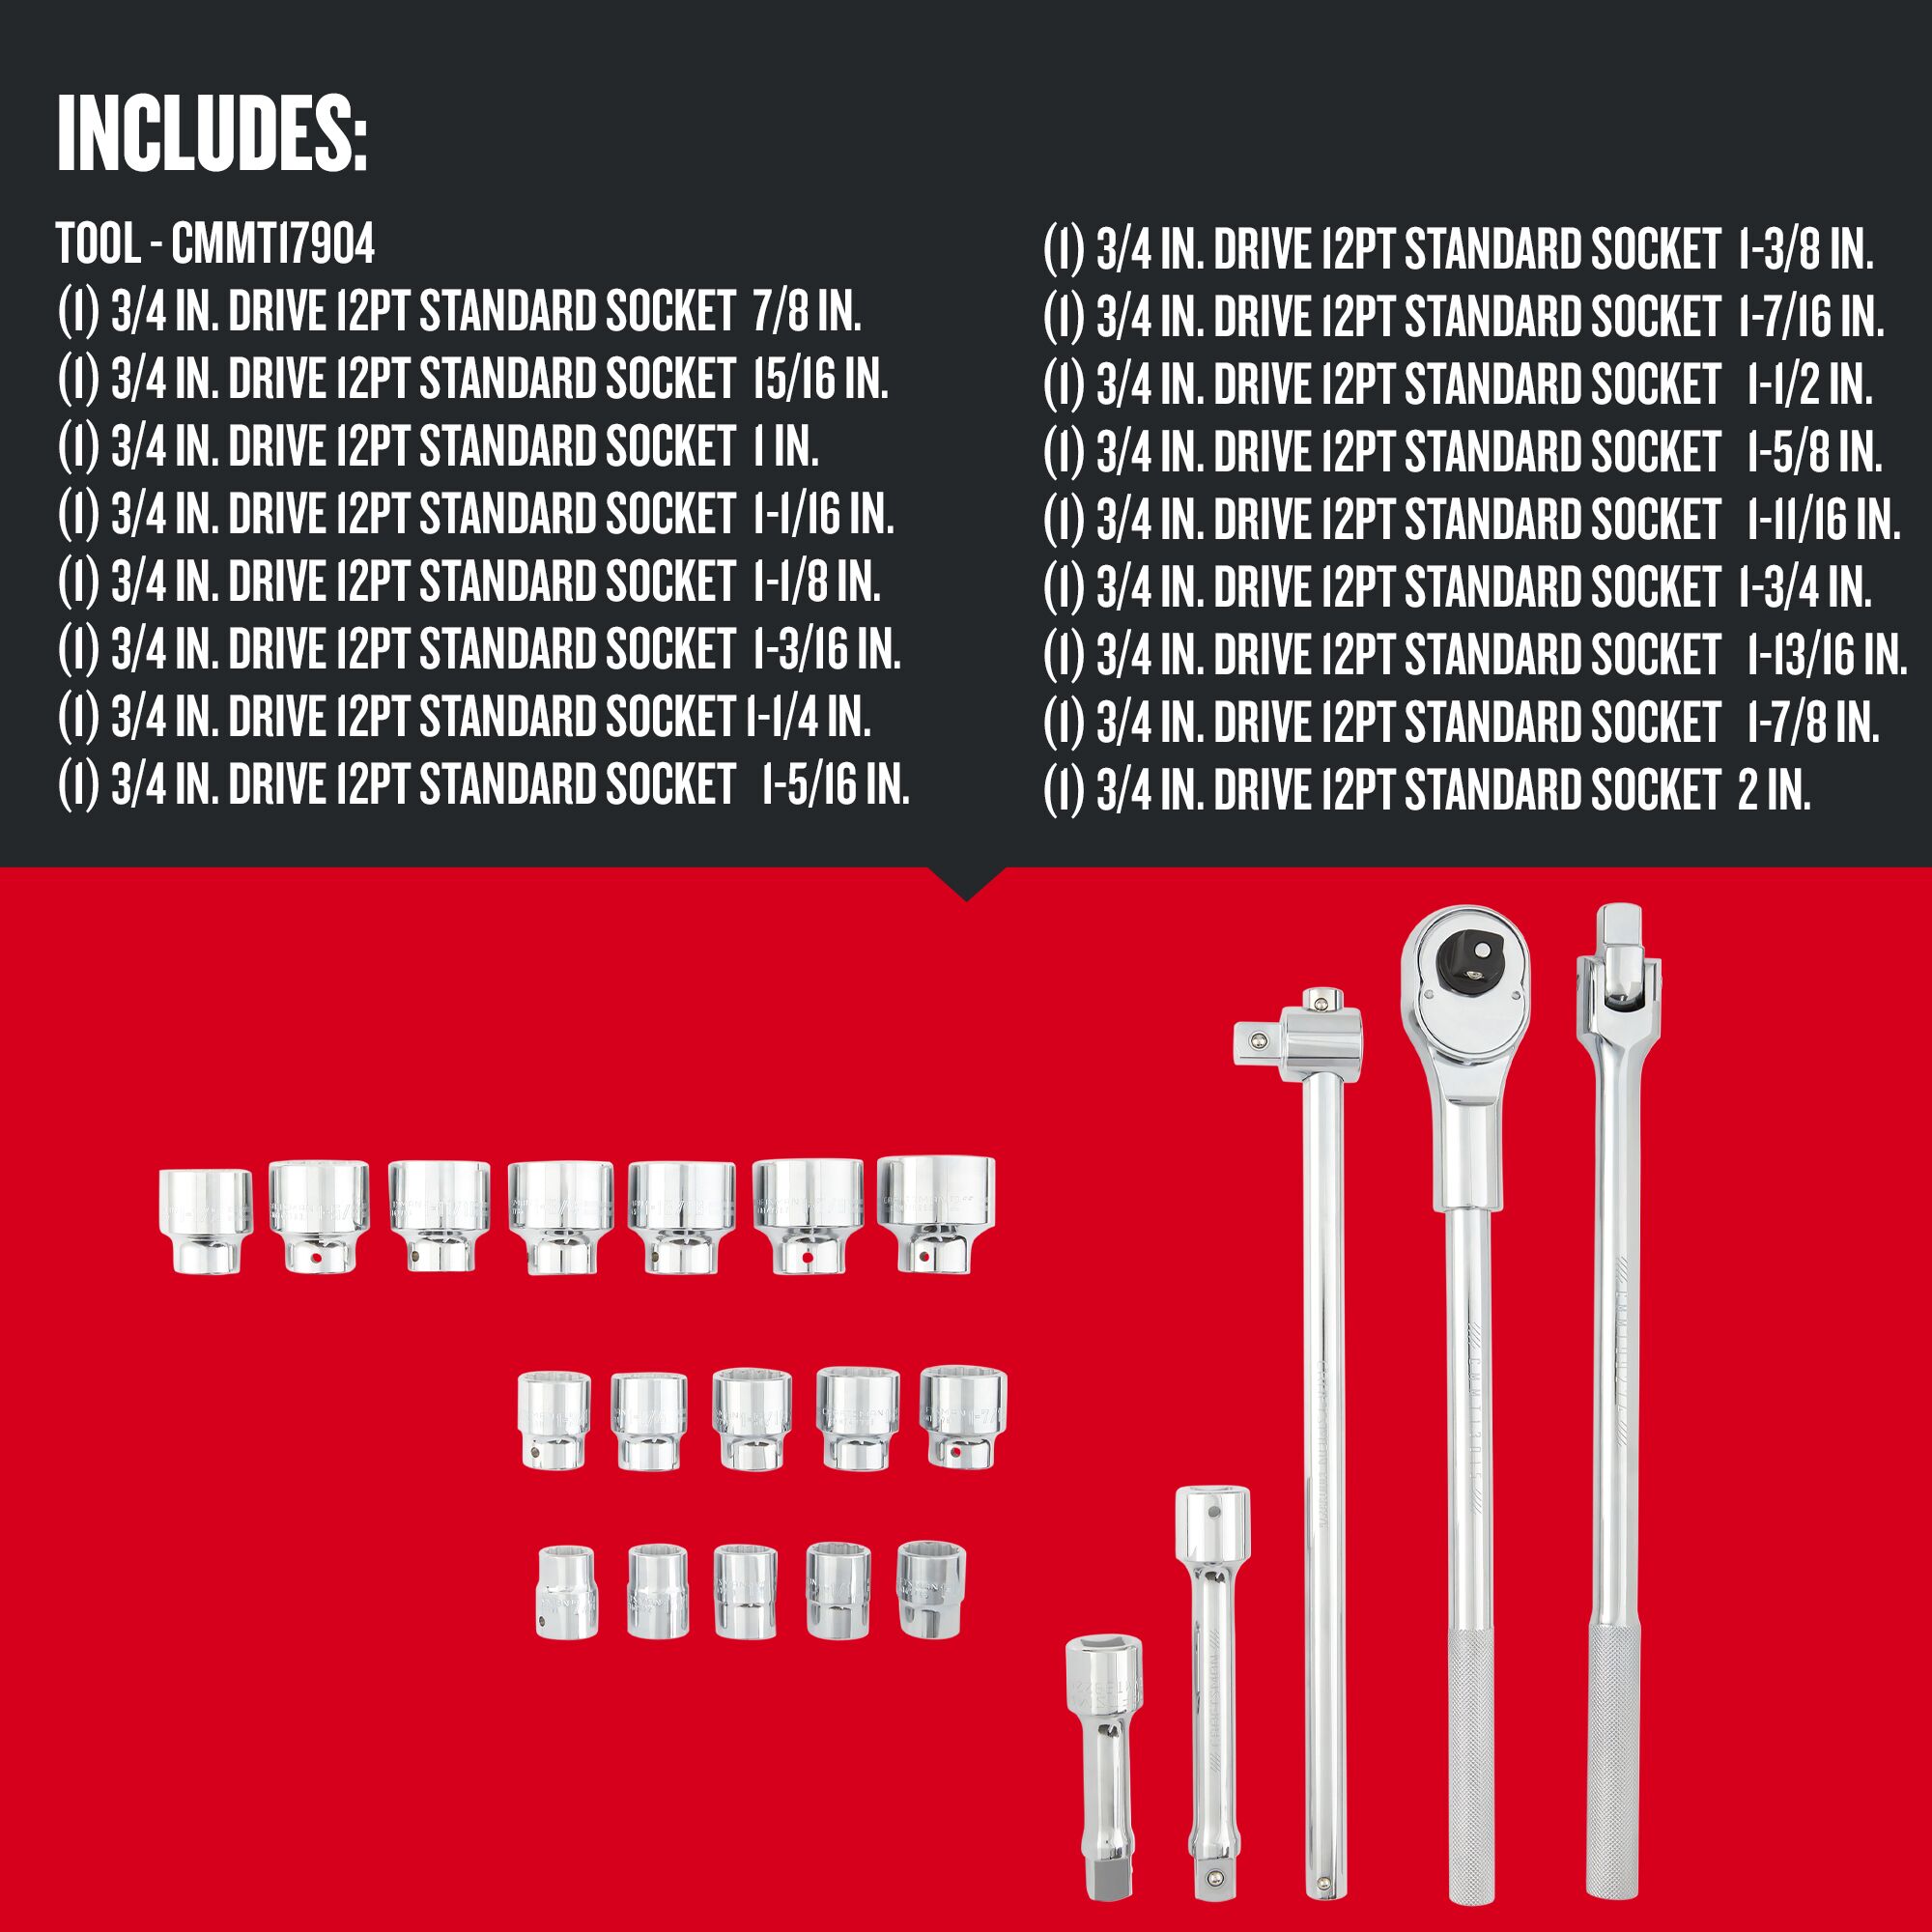 Graphic of CRAFTSMAN Sockets: Bit Sockets highlighting product features